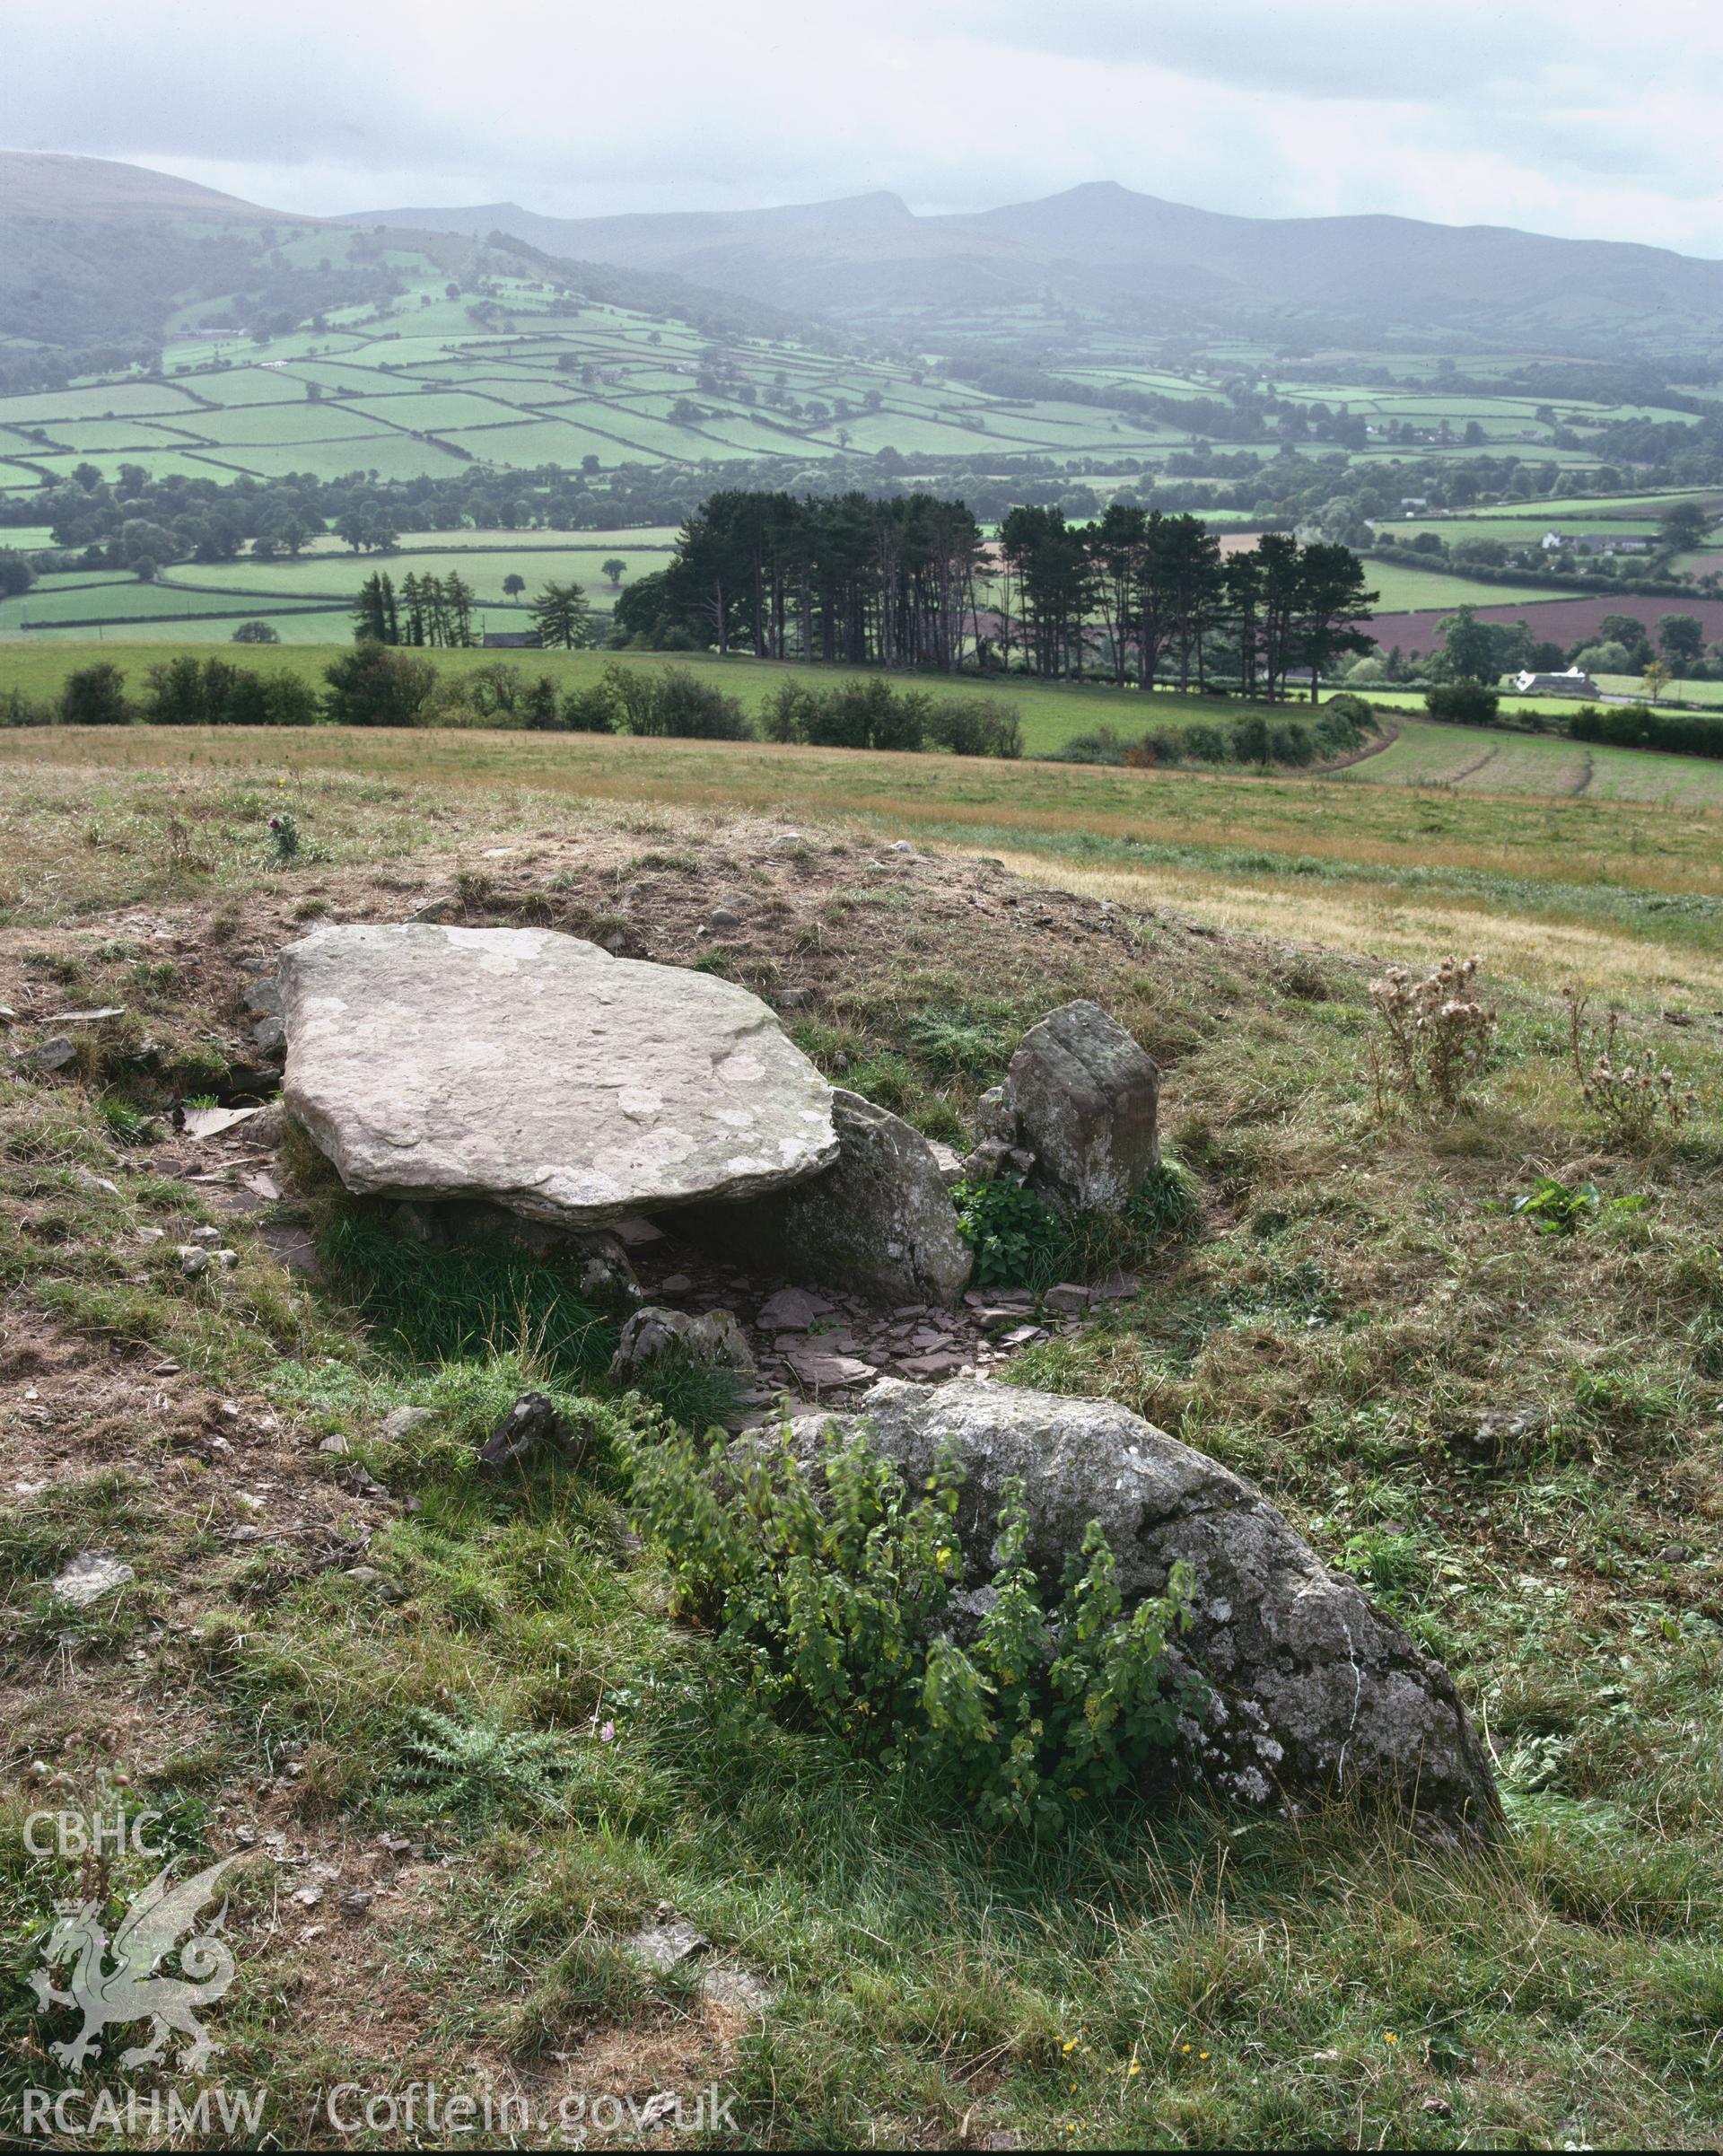 Colour transparency showing a view of Ty Illtud chambered tomb, produced by Iain Wright, c.1981